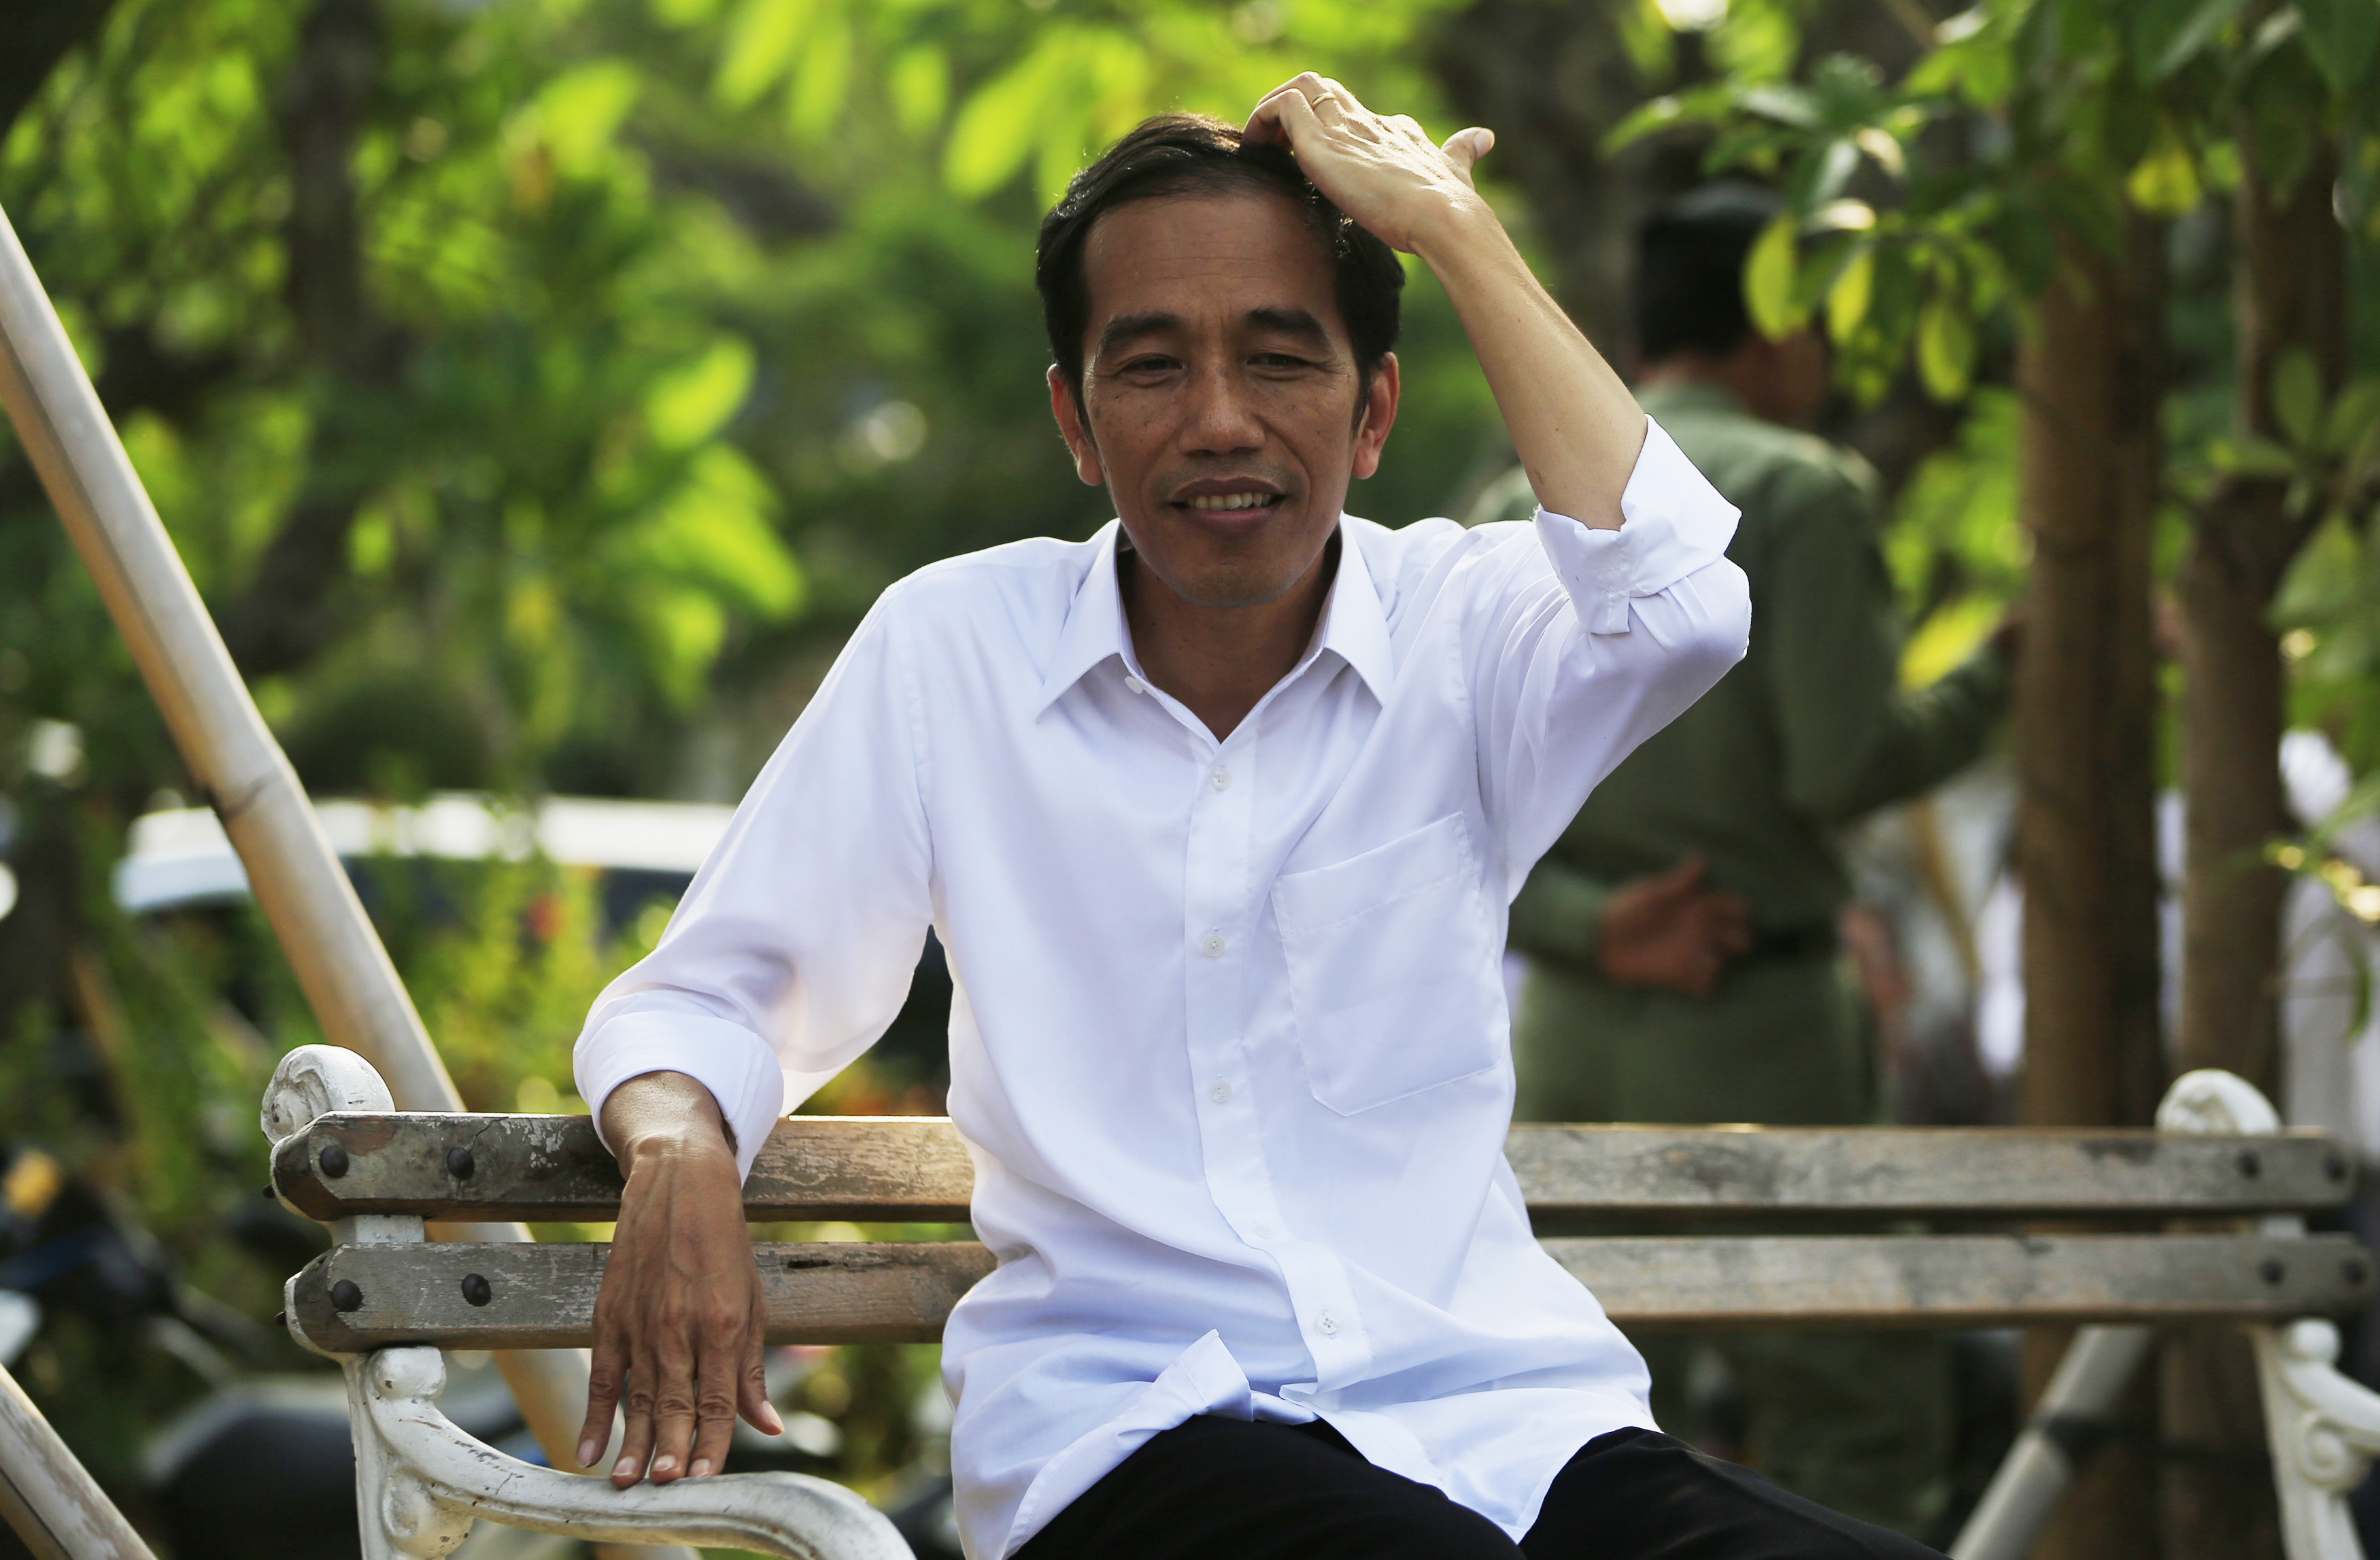 Indonesian presidential candidate Joko "Jokowi" Widodo, now president elect, sits on a bench while waiting for the announcement of election results by the Elections Commission at Waduk Pluit in Jakarta July 22, 2014. (Beawiharta Beawiharta—Reuters)